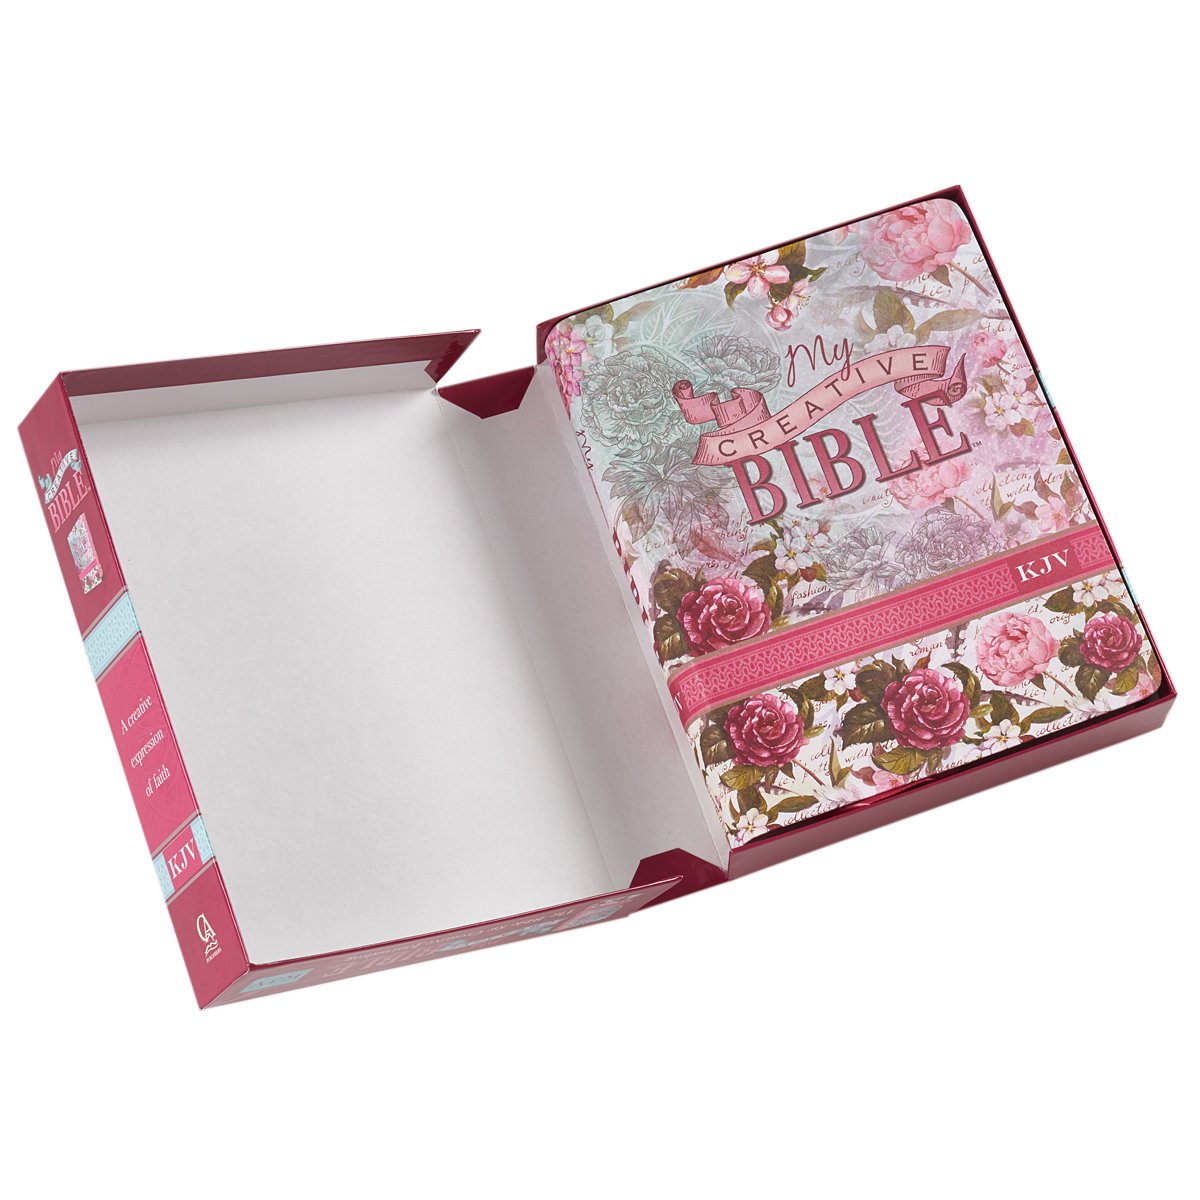 KJV Holy Bible, My Creative Bible, Faux Leather Flexcover - Ribbon Marker, King James Version, Pink Floral